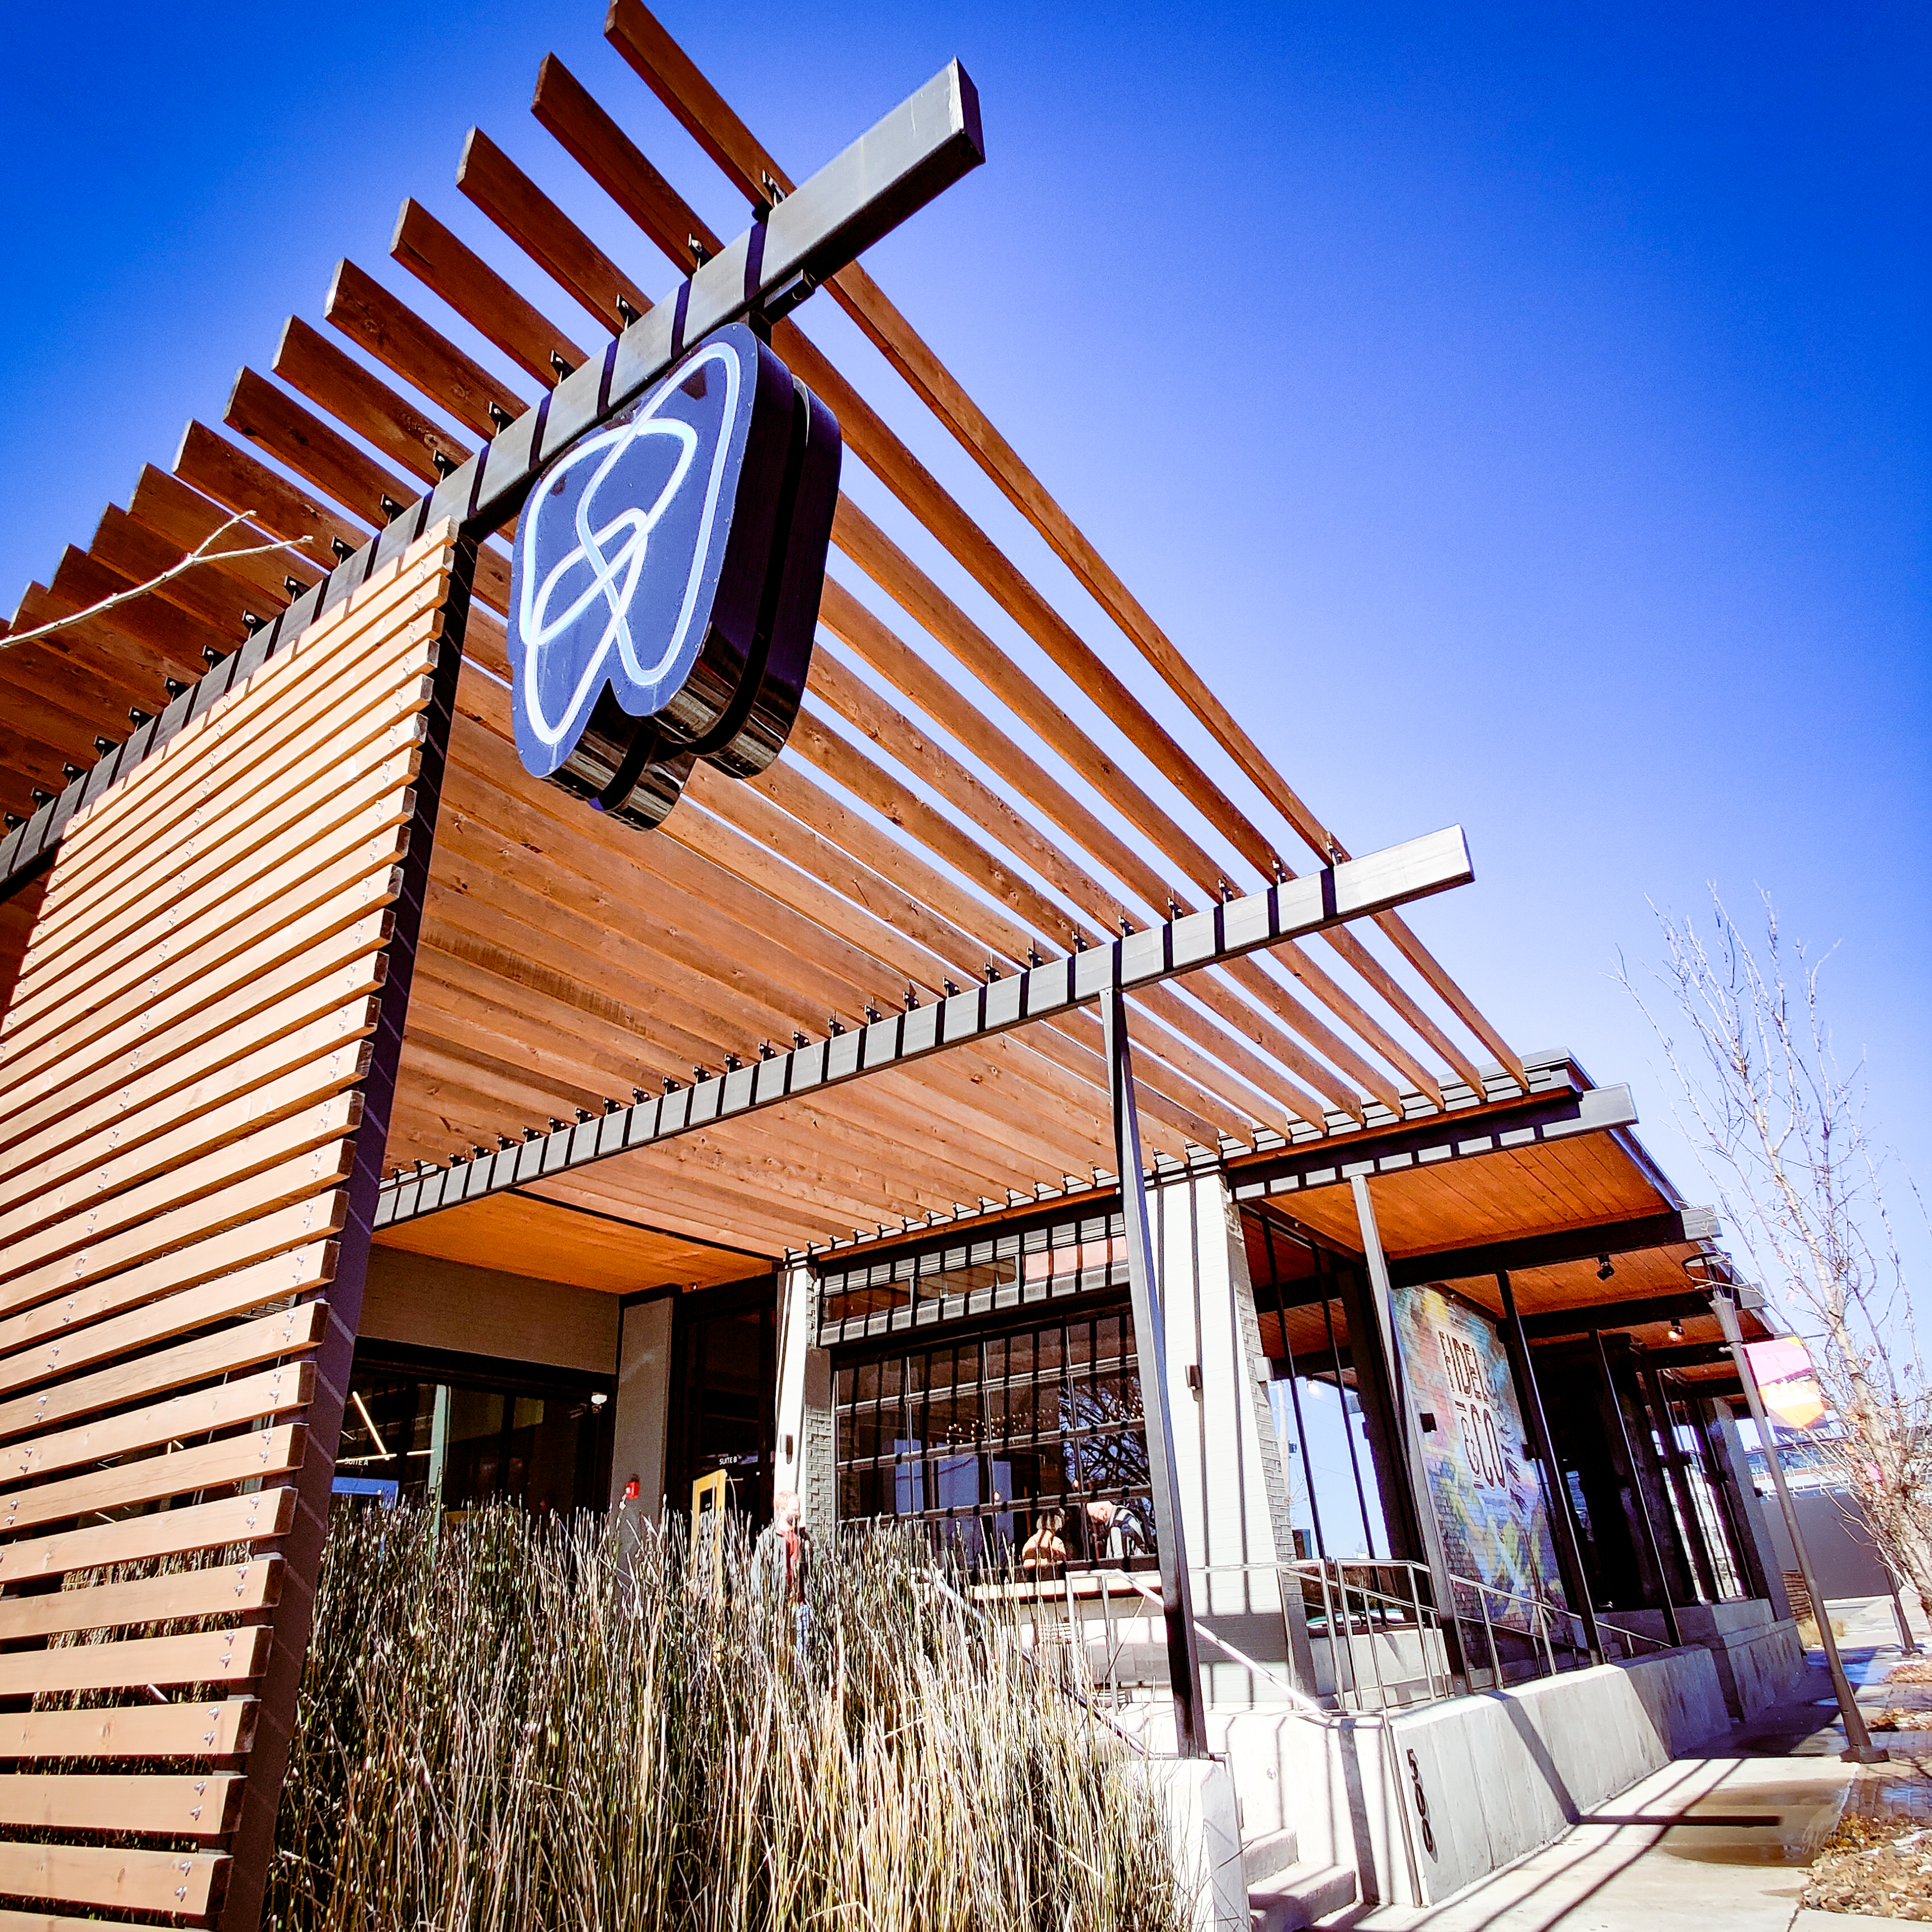 a modern building with a wood-slatted façade and roof awning for Fidel & Co coffee roasters in Little Rock Arkansas